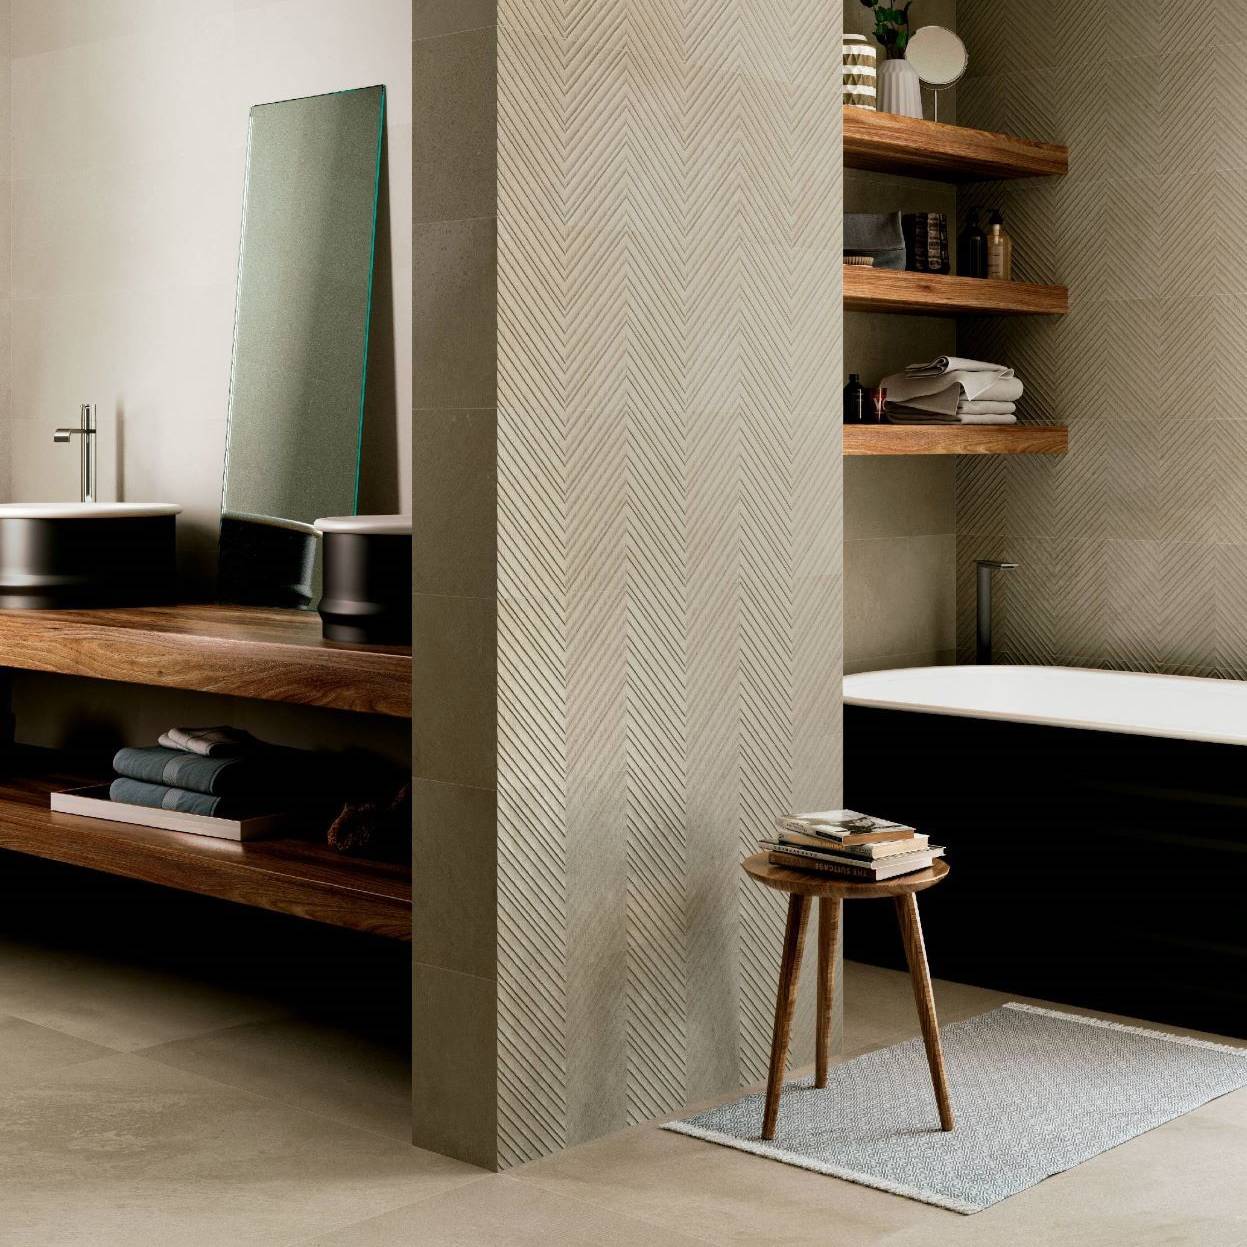 Tribeca_3_G | Stones & More | Finest selection of Mosaics, Glass, Tile and Stone